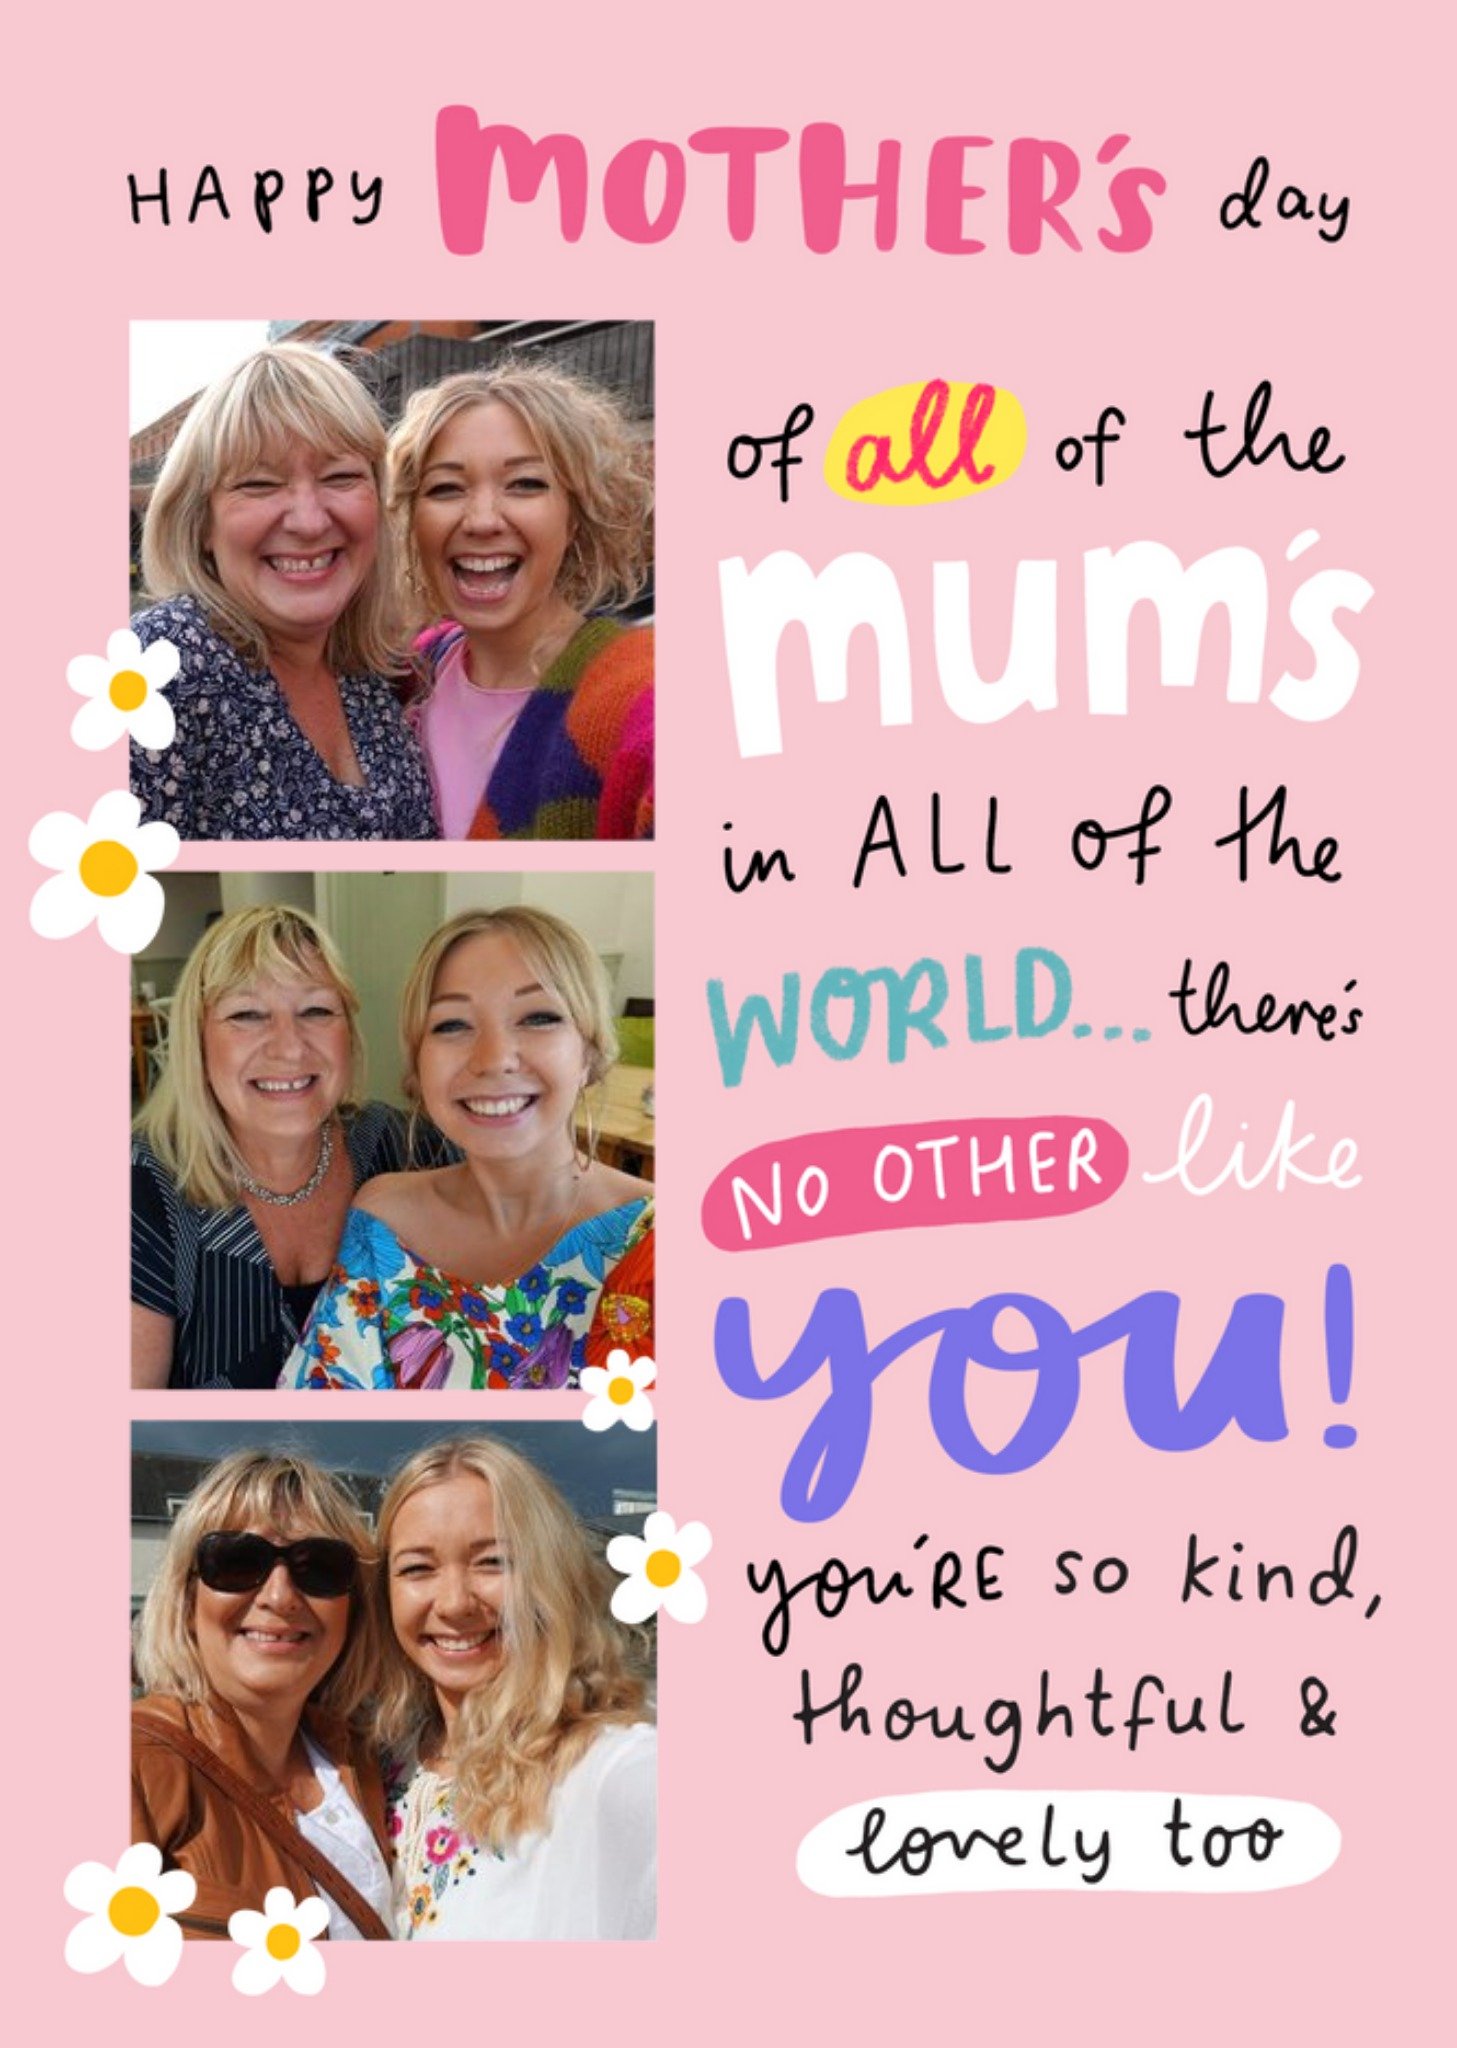 Moonpig To All The Mother's In The World Theres No Other Like You Photo Upload Mothers Day Card Ecar